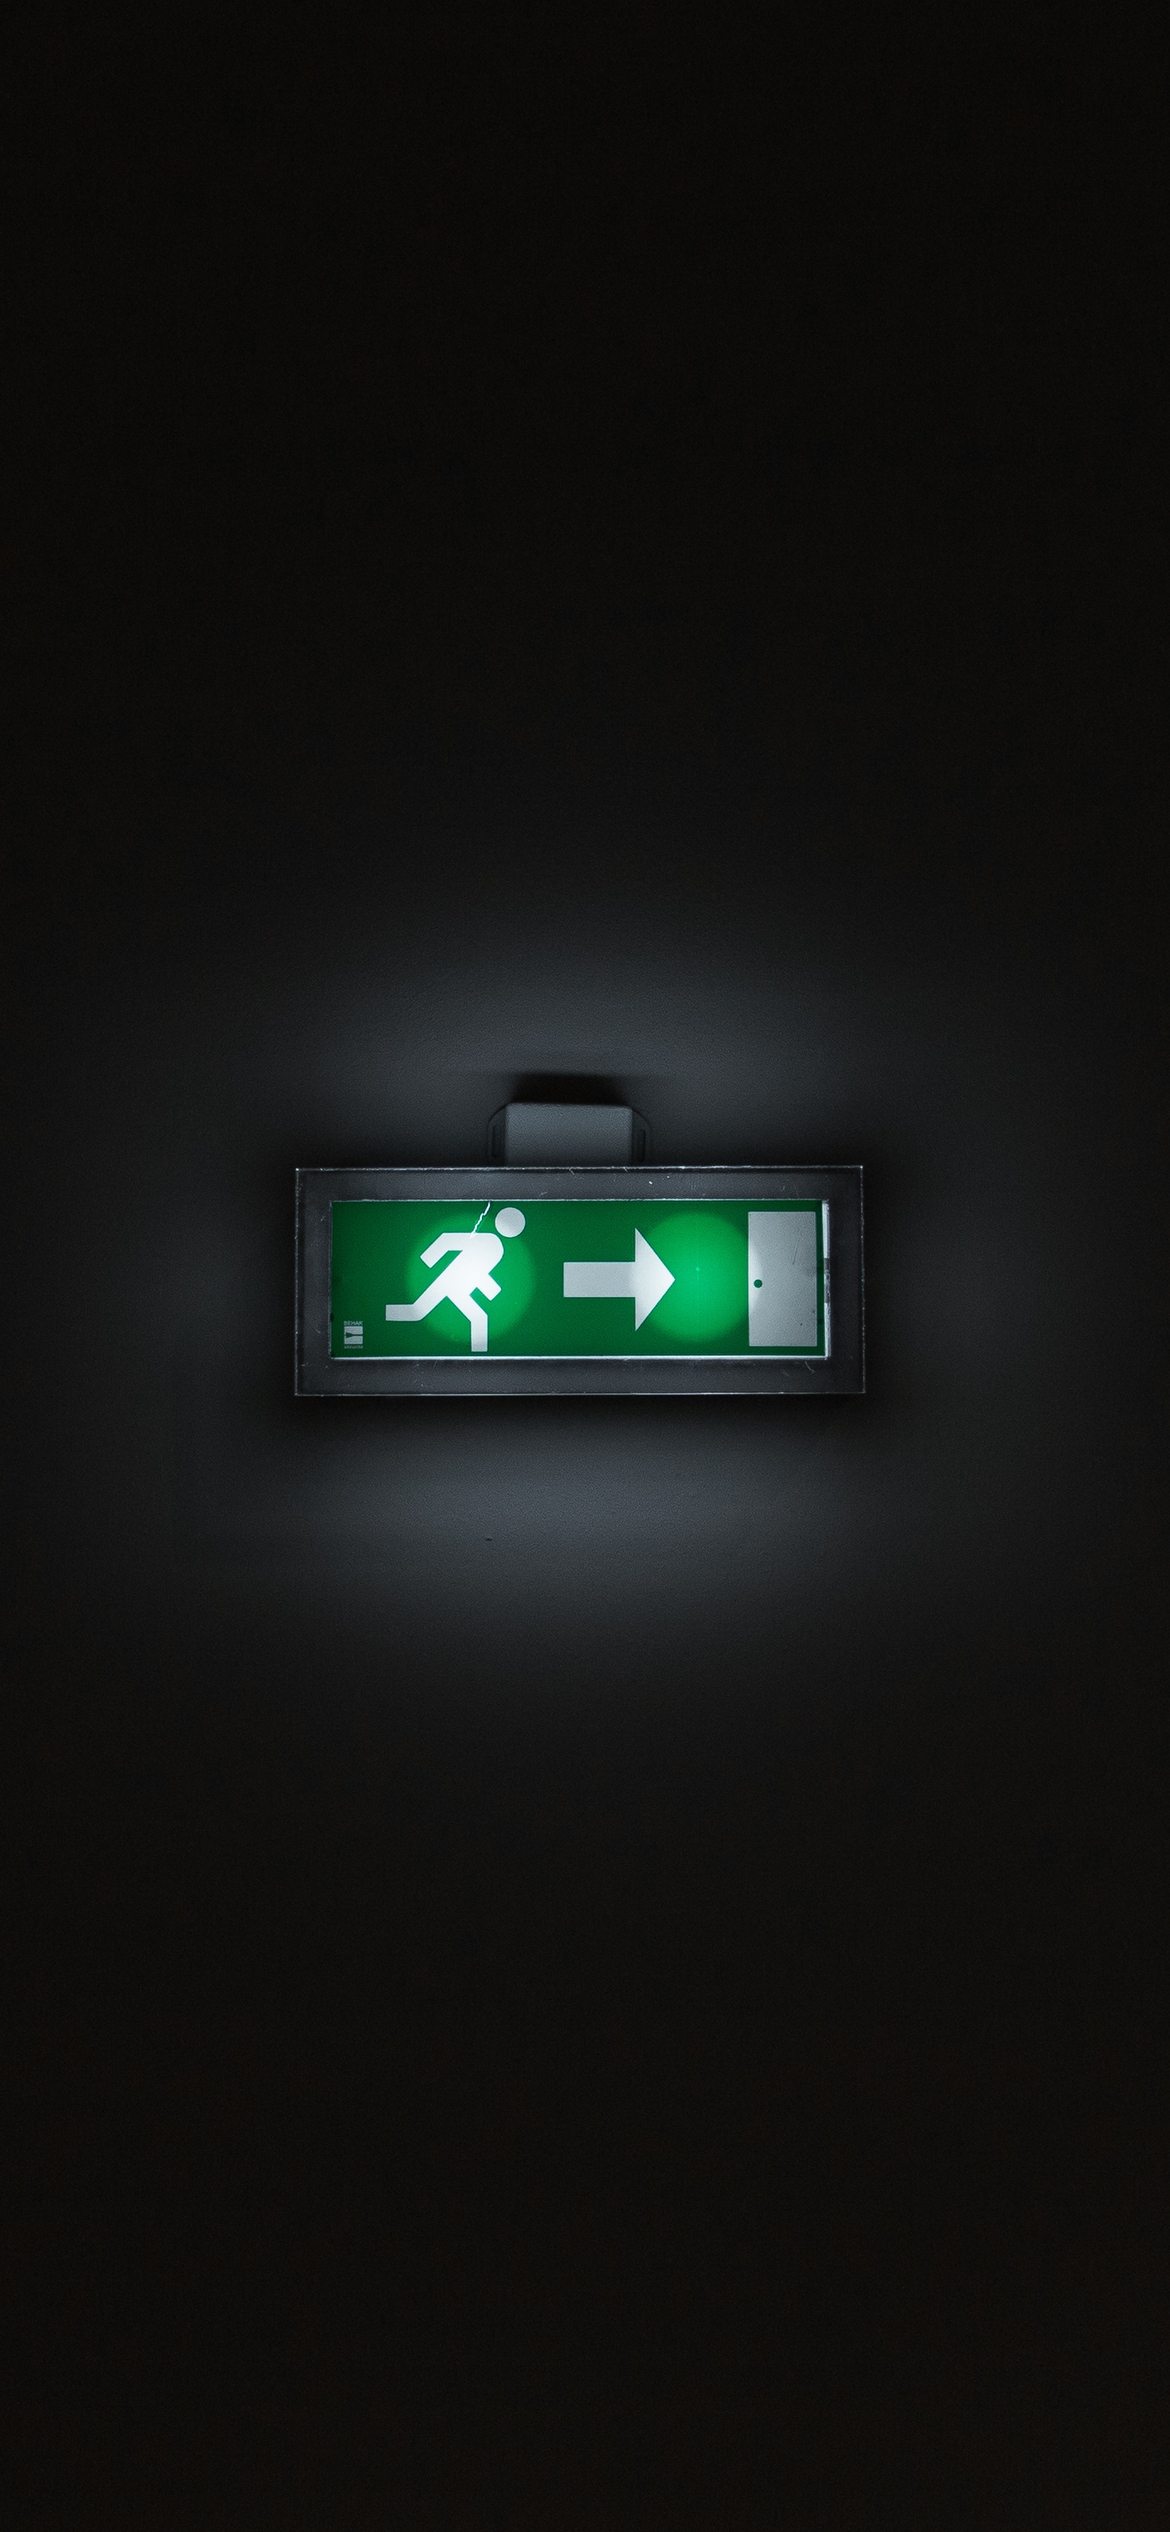 Download The Exit Exit Light Green Lightning Wallpaper in 1170x2532  Resolution